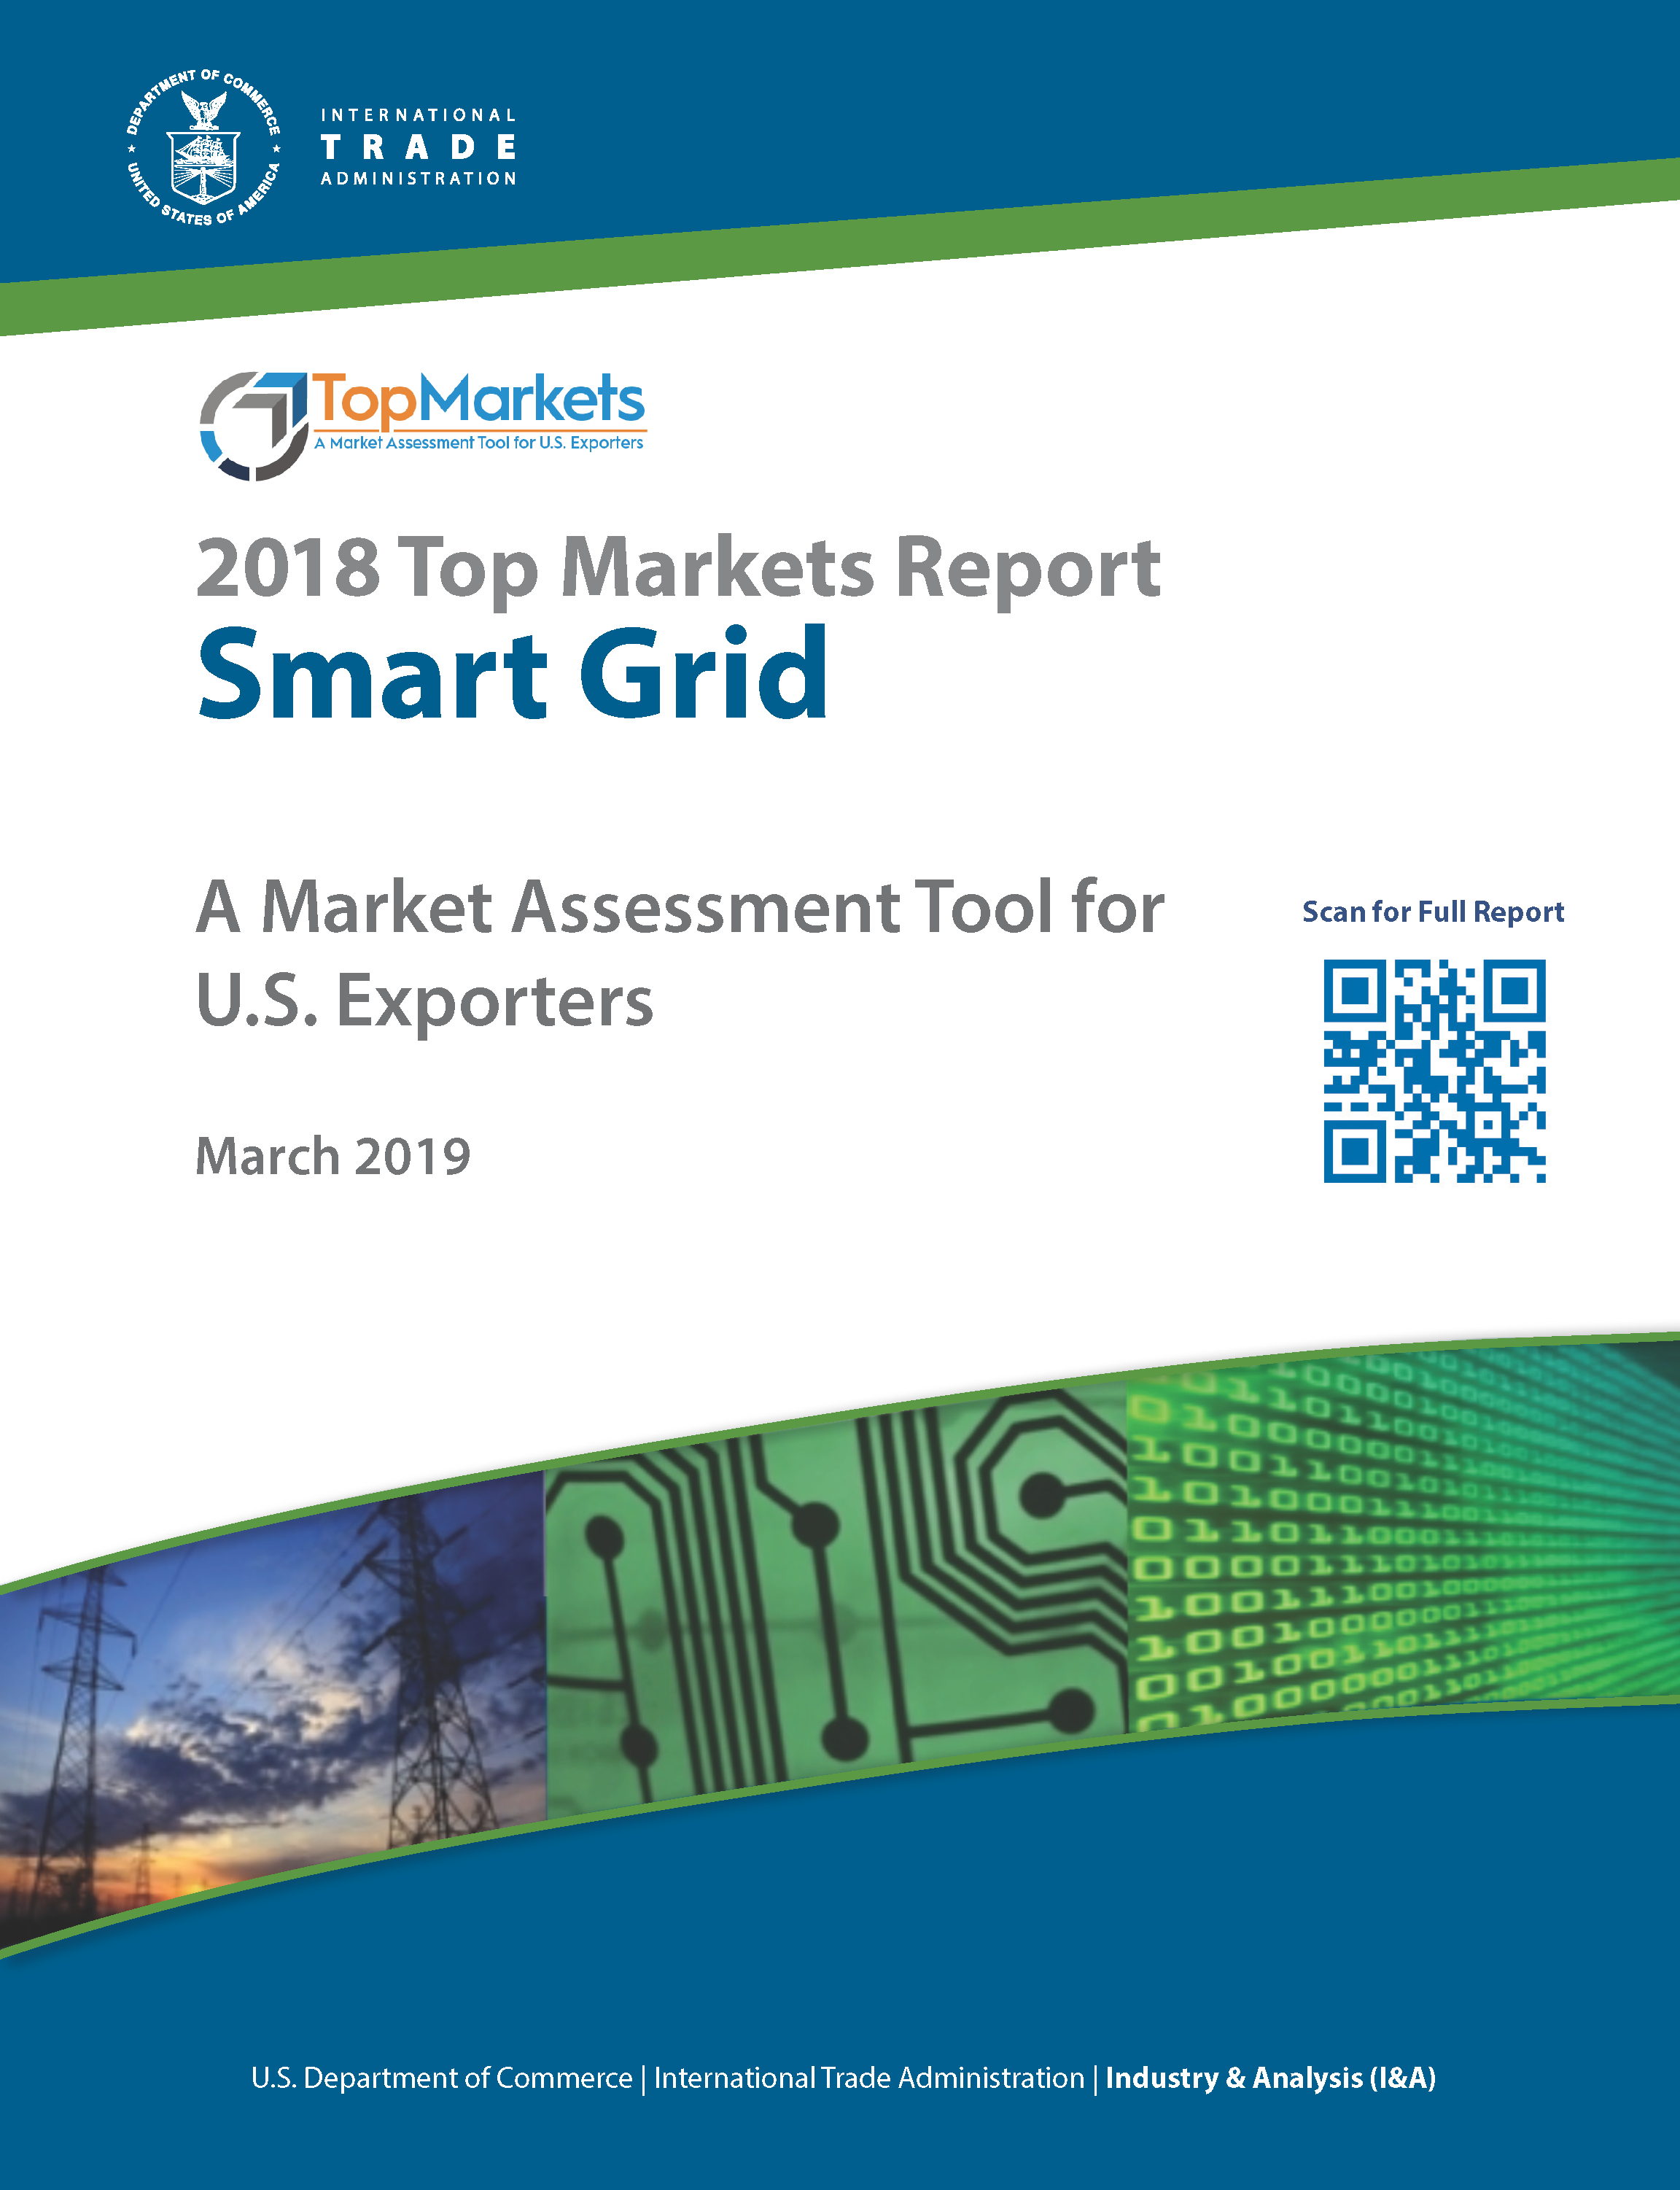 click to download the Smart Grid Report